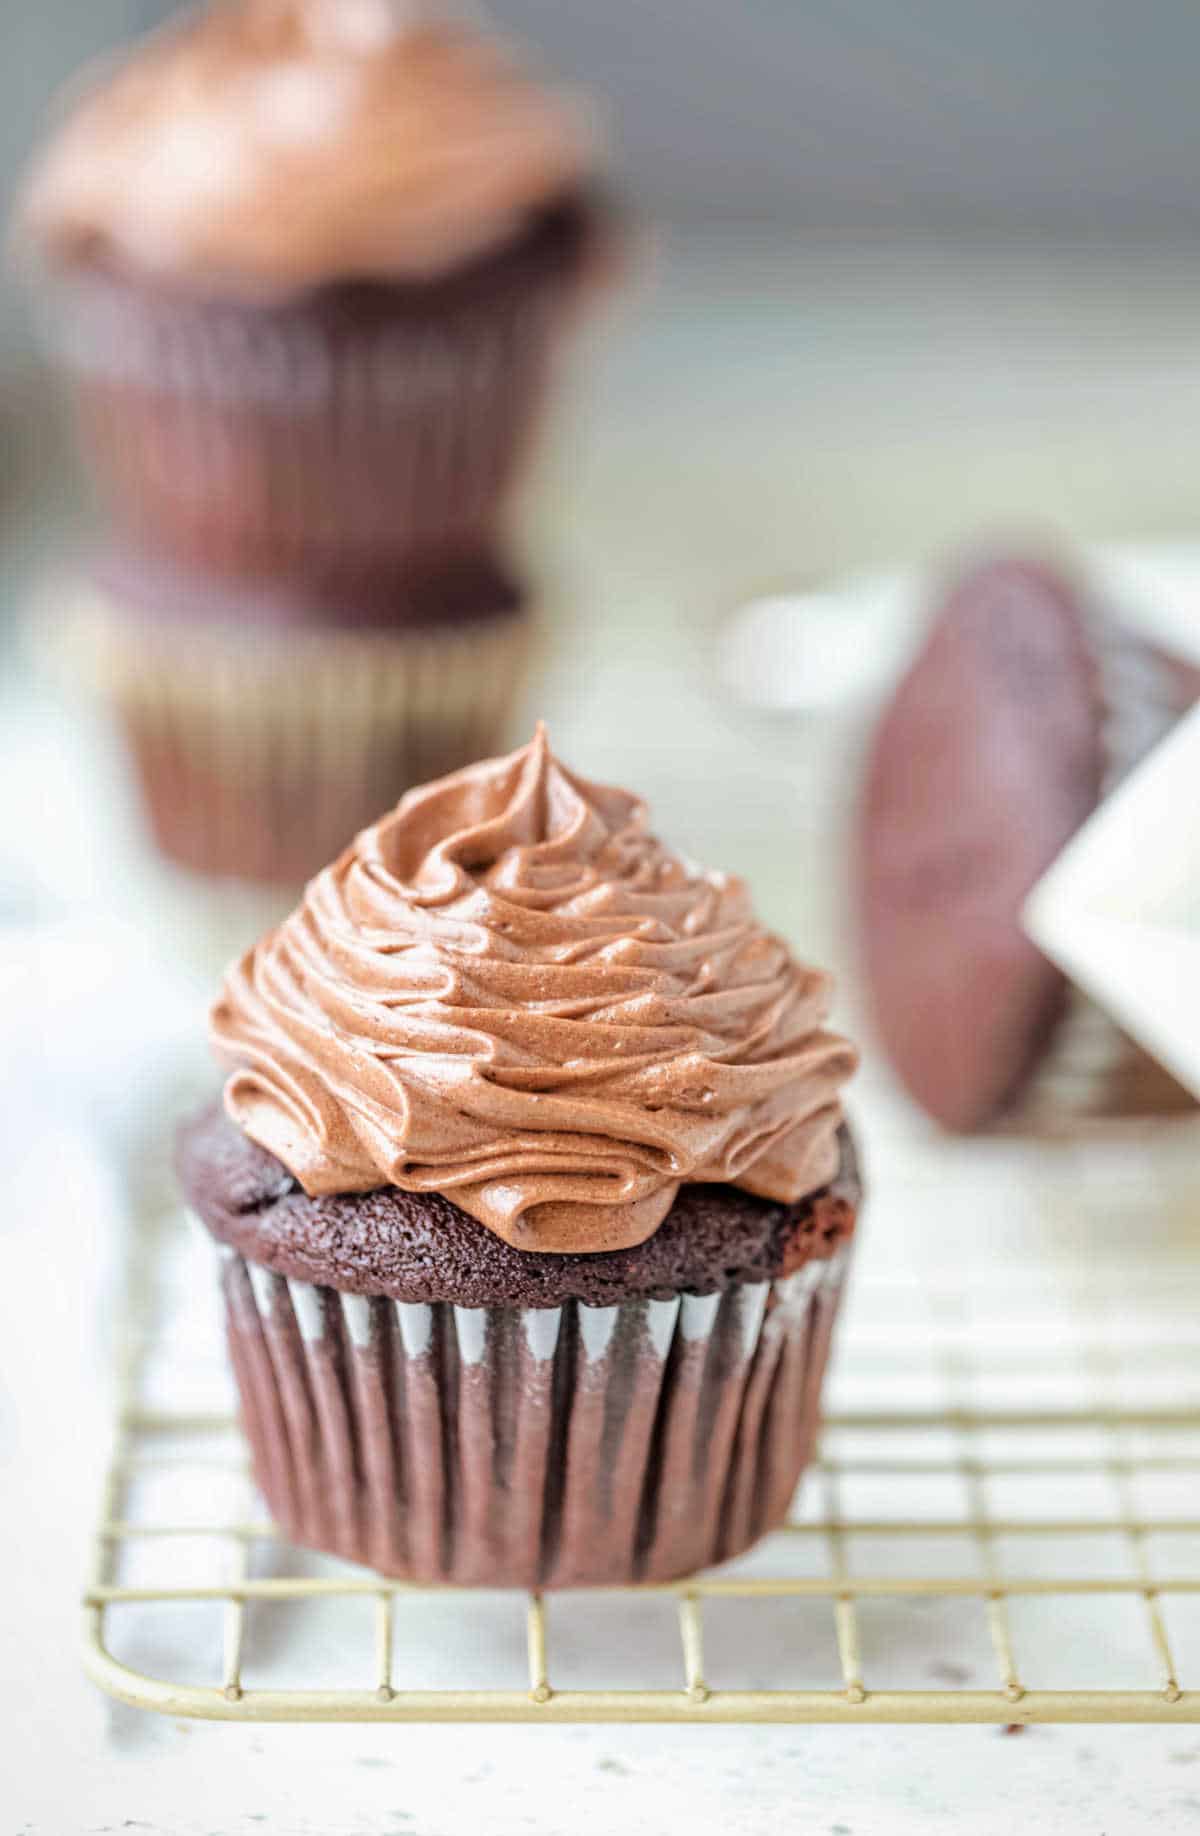 Chocolate cupcake topped with a ruffle of chocolate cream cheese frosting.